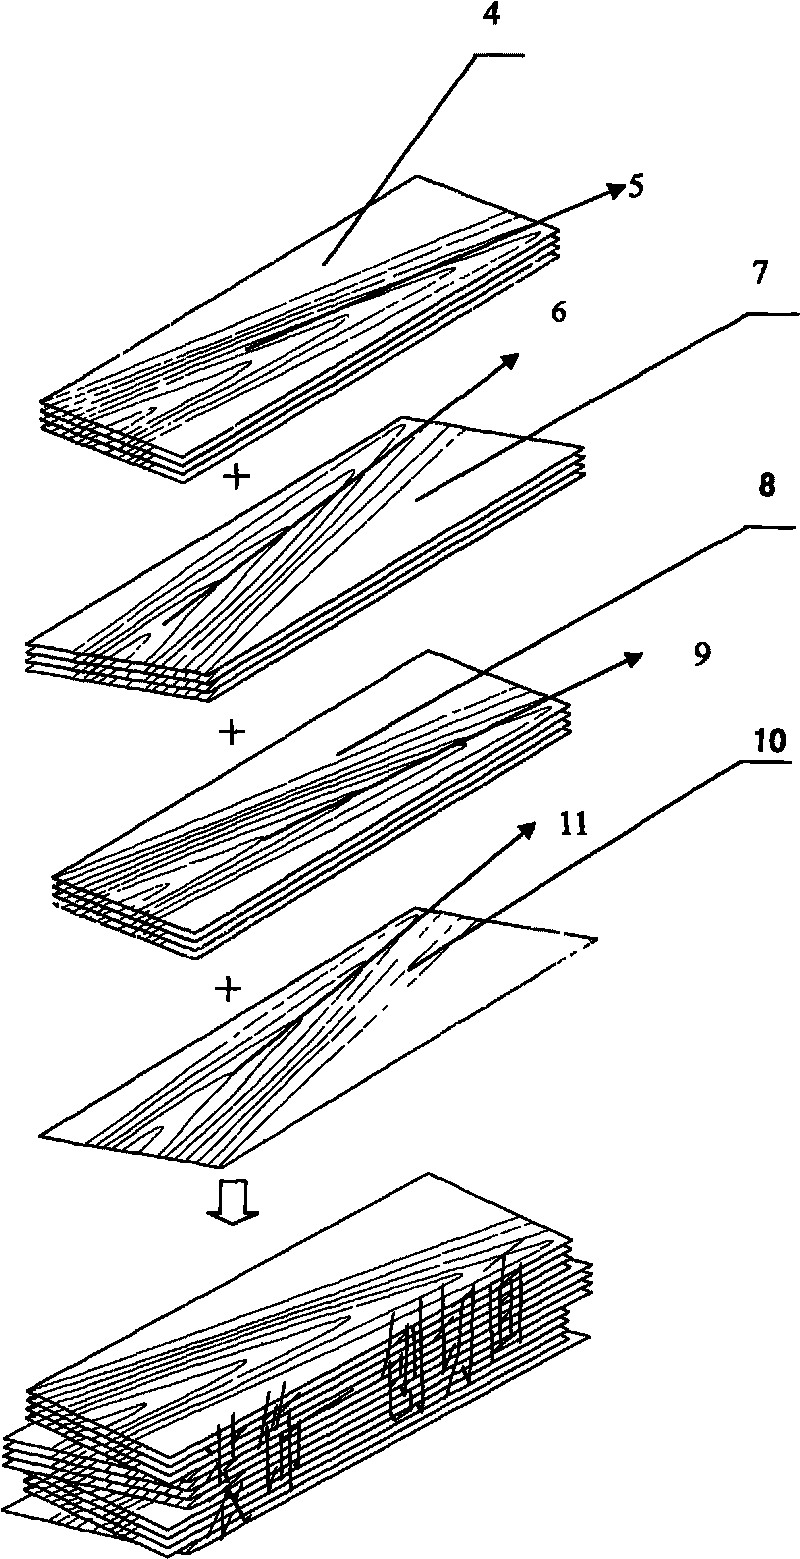 Method for manufacturing shadow changing recombined decorative wood by using natural wood